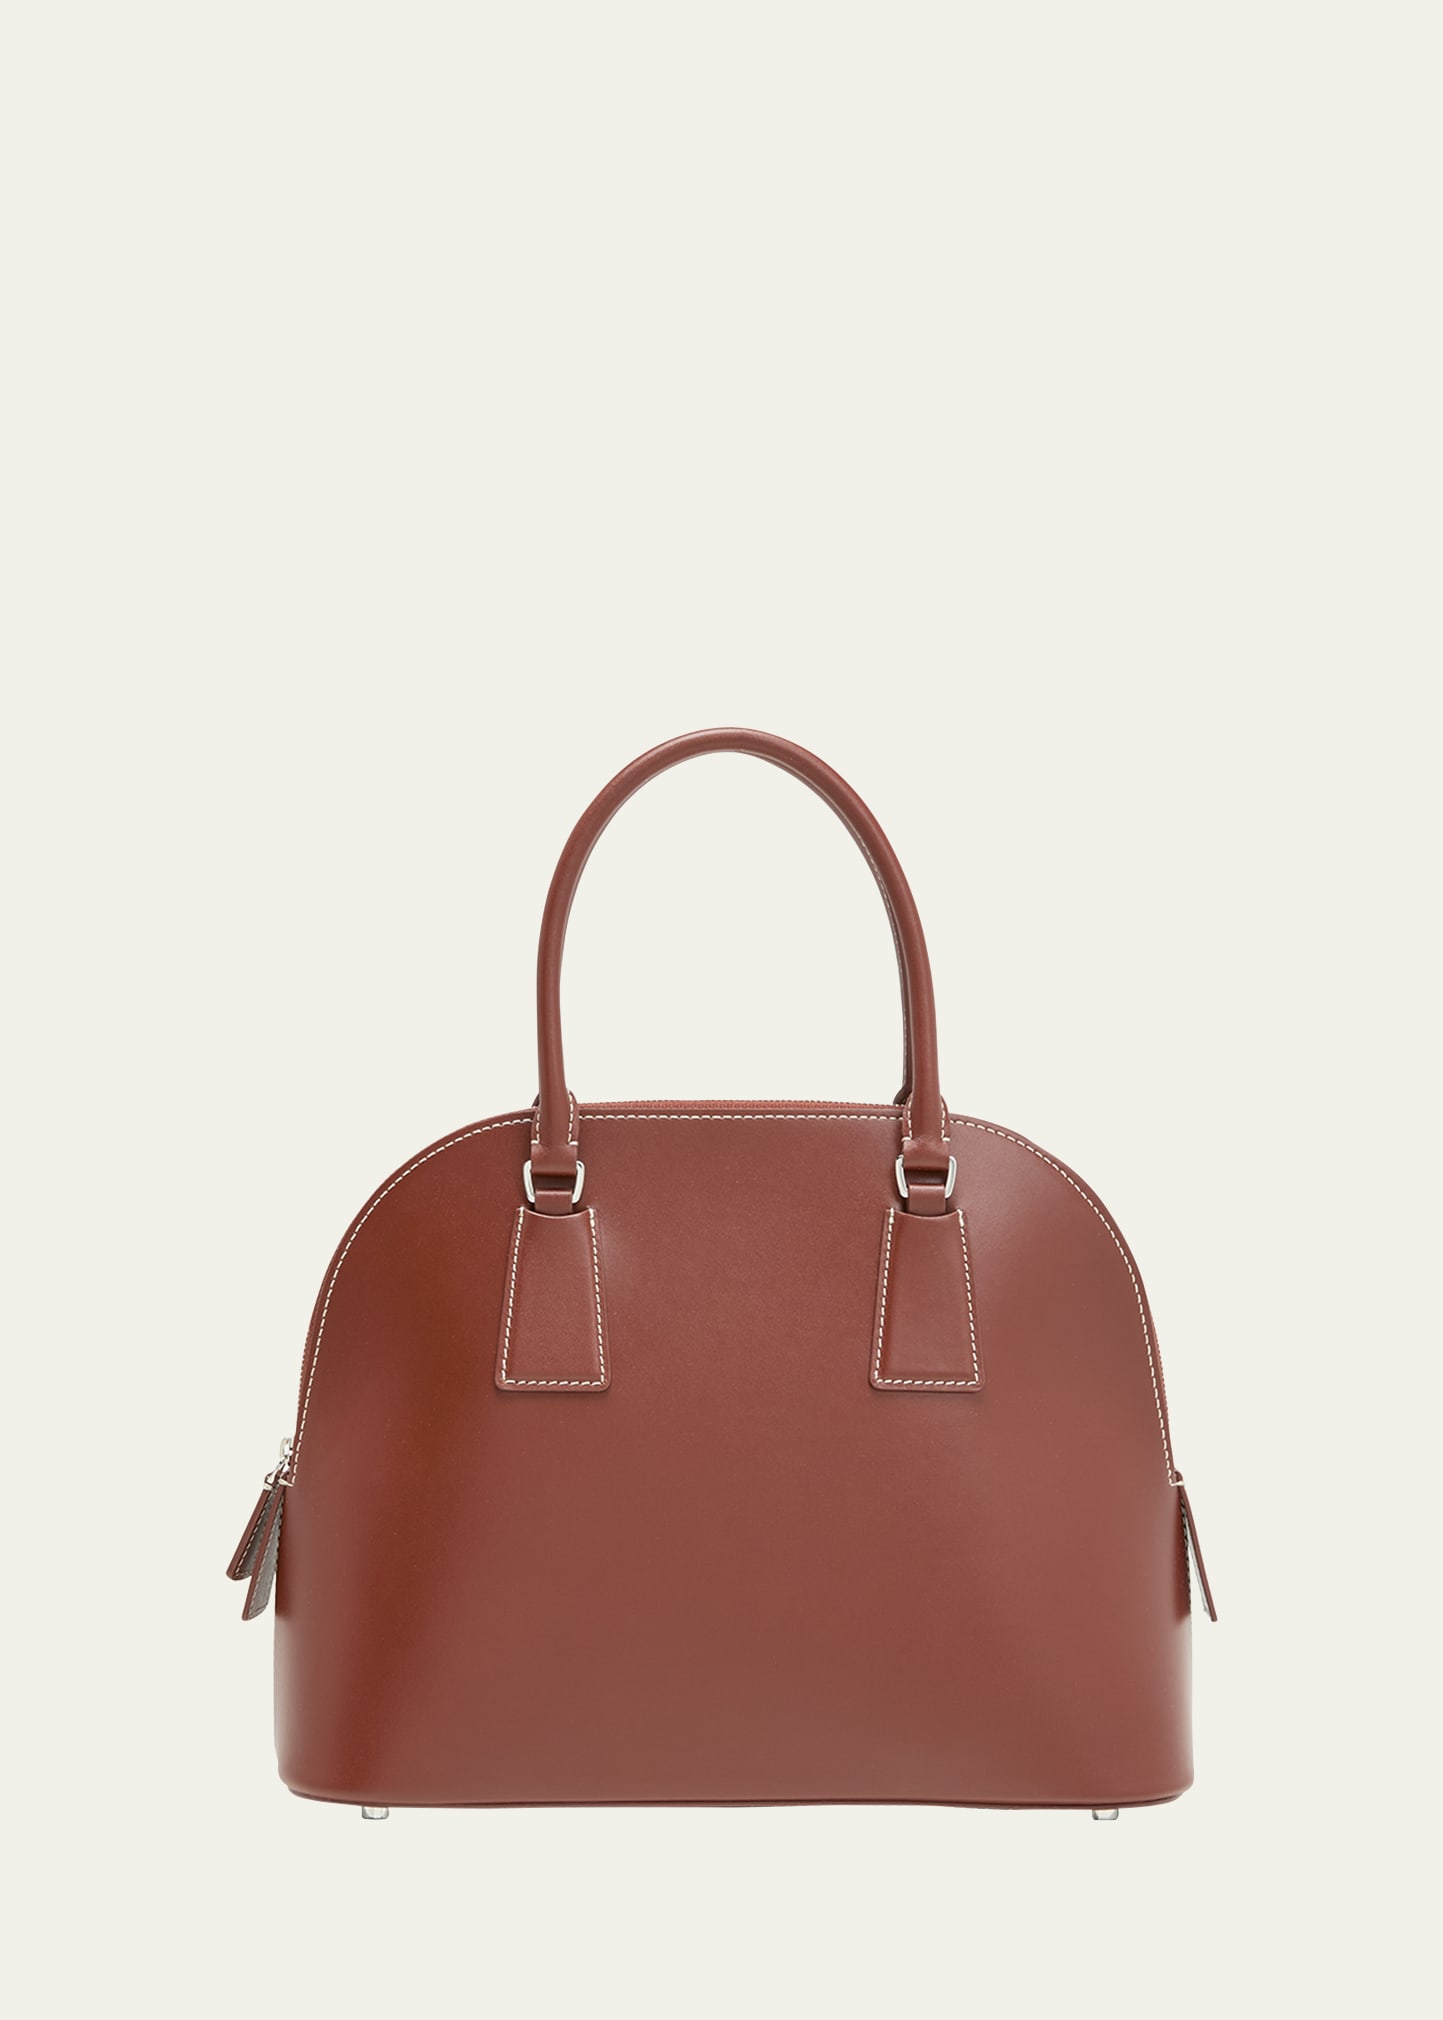 The Row Nina Top-handle Bag In Leather In Chywd Cherry Wood